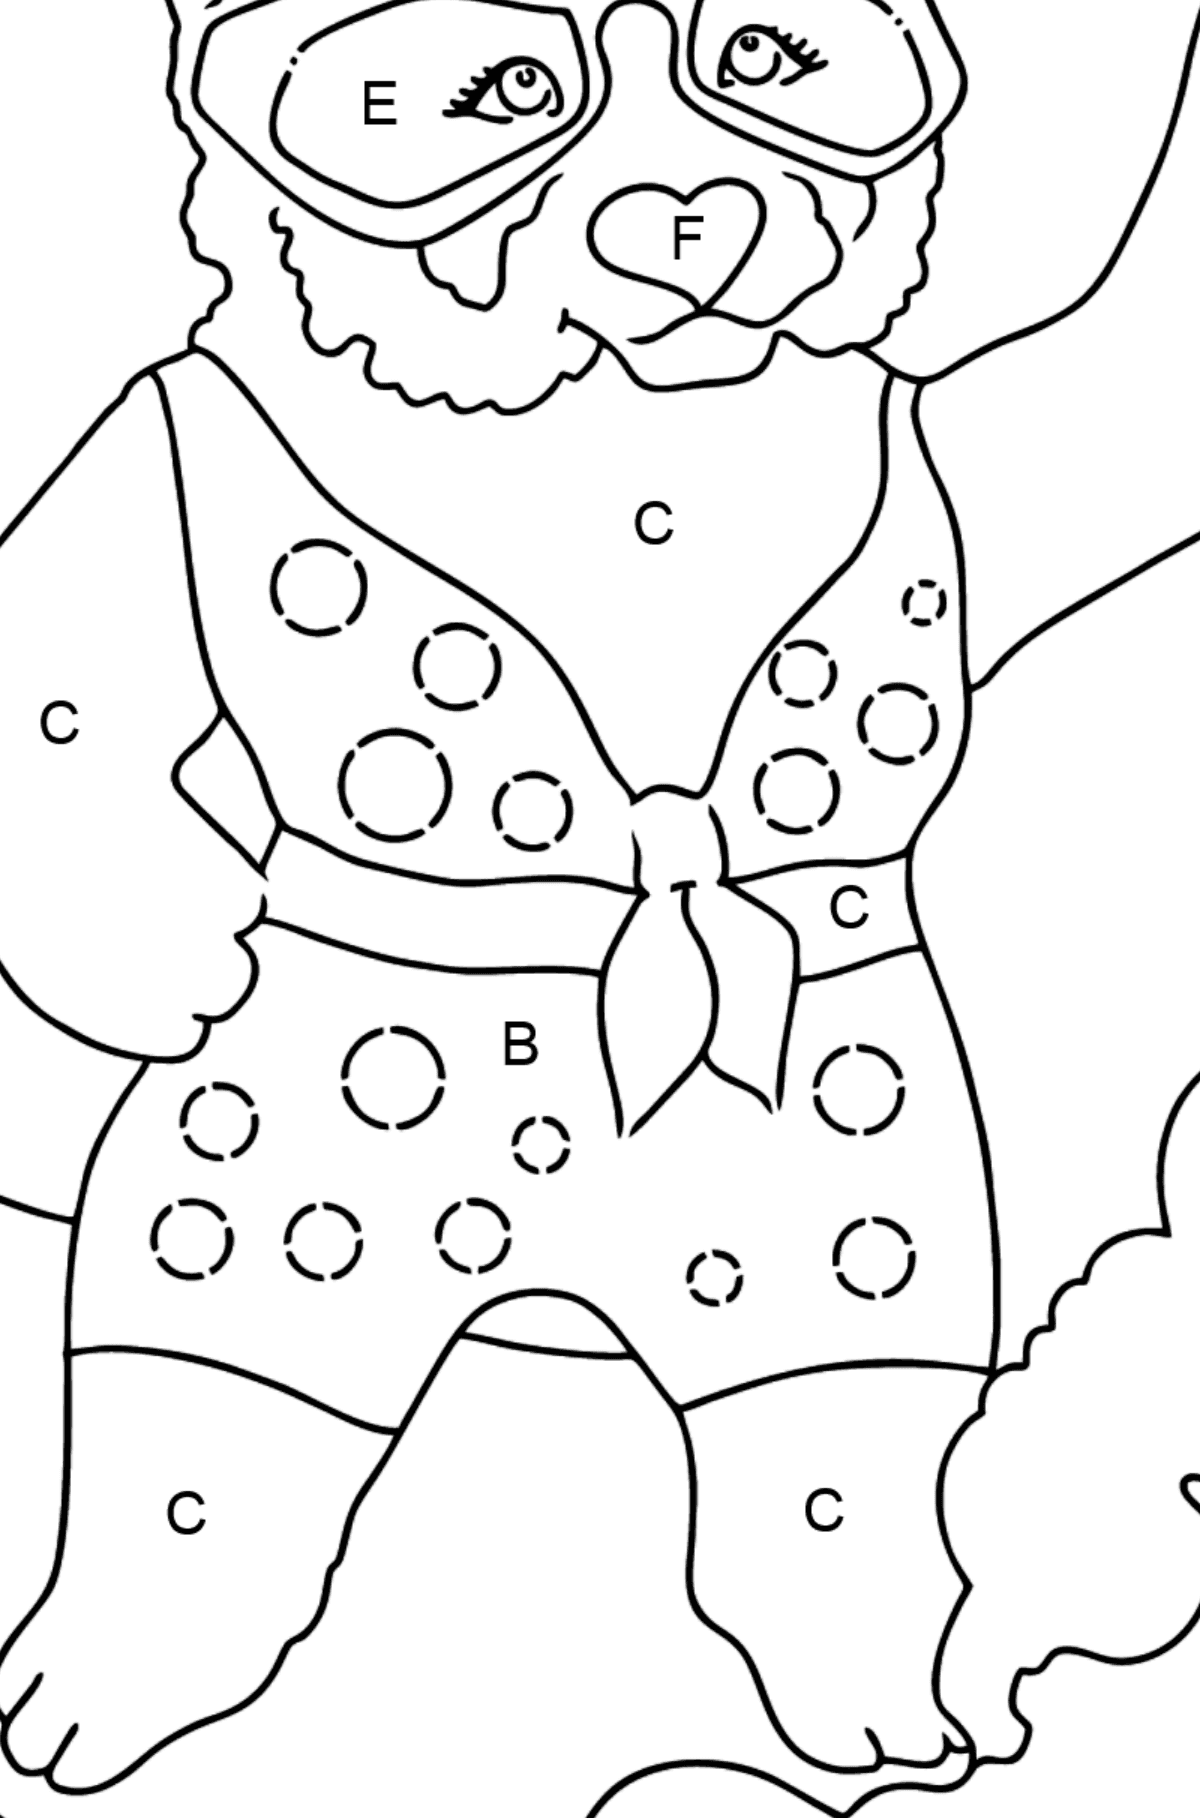 Coloring Page - A Panda Surfer - Coloring by Letters for Kids